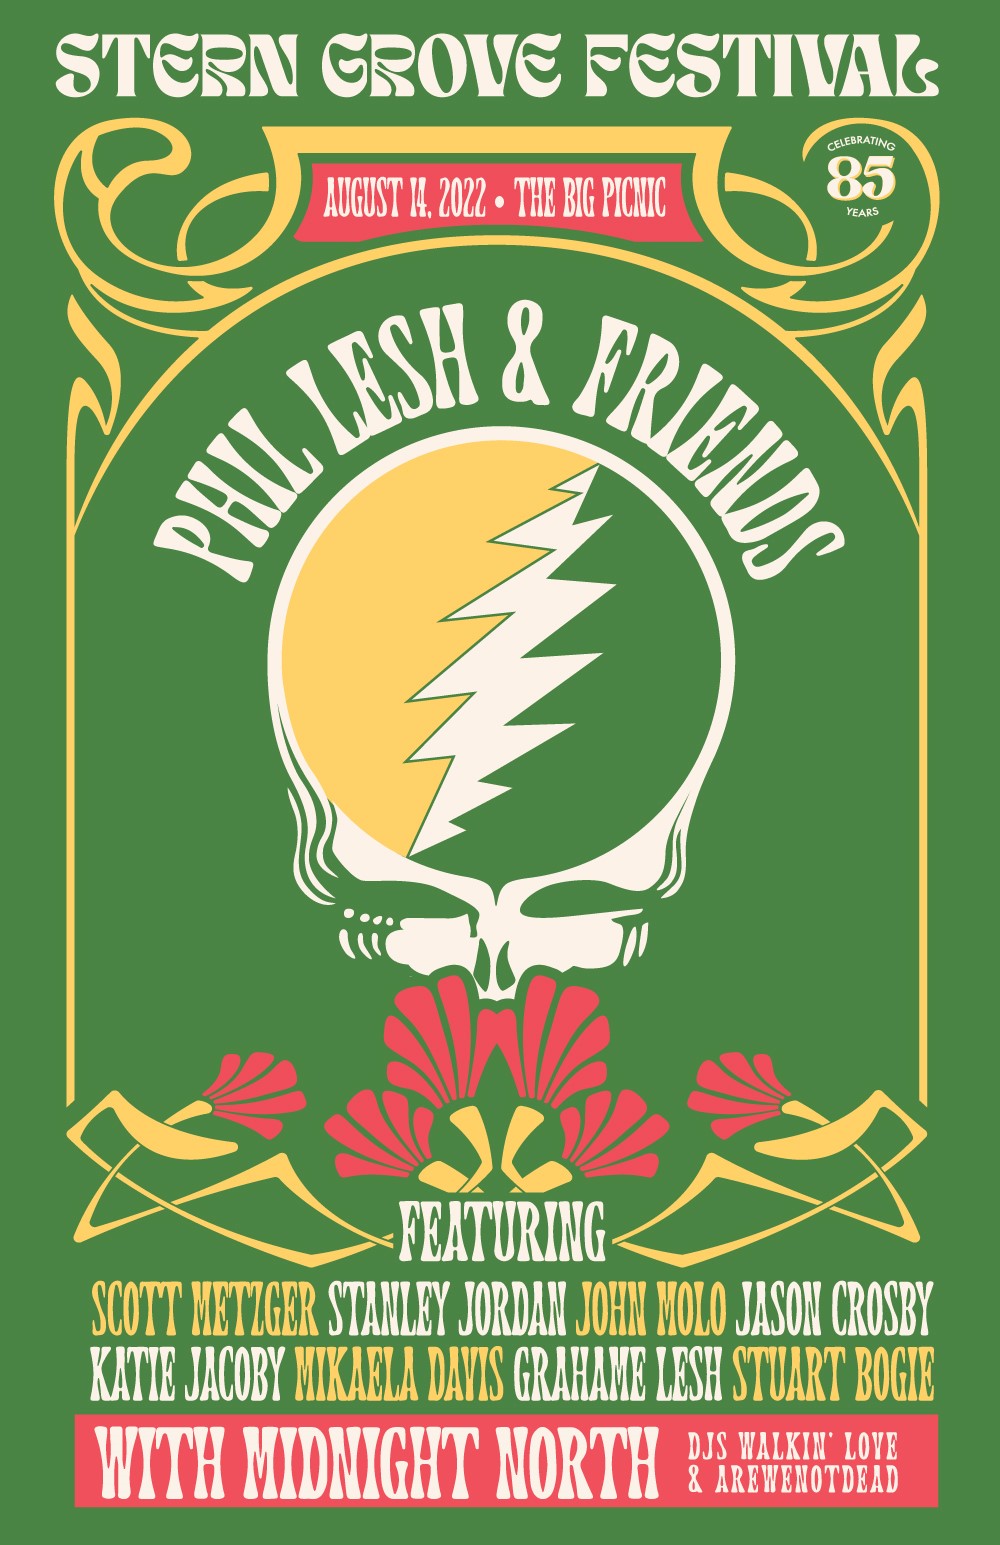 Phil Lesh’s performance at the Stern Grove Festival 2022 on Aug. 14 will mark the first admission-free concert in his hometown in the San Francisco Bay Area in more than 30 years.